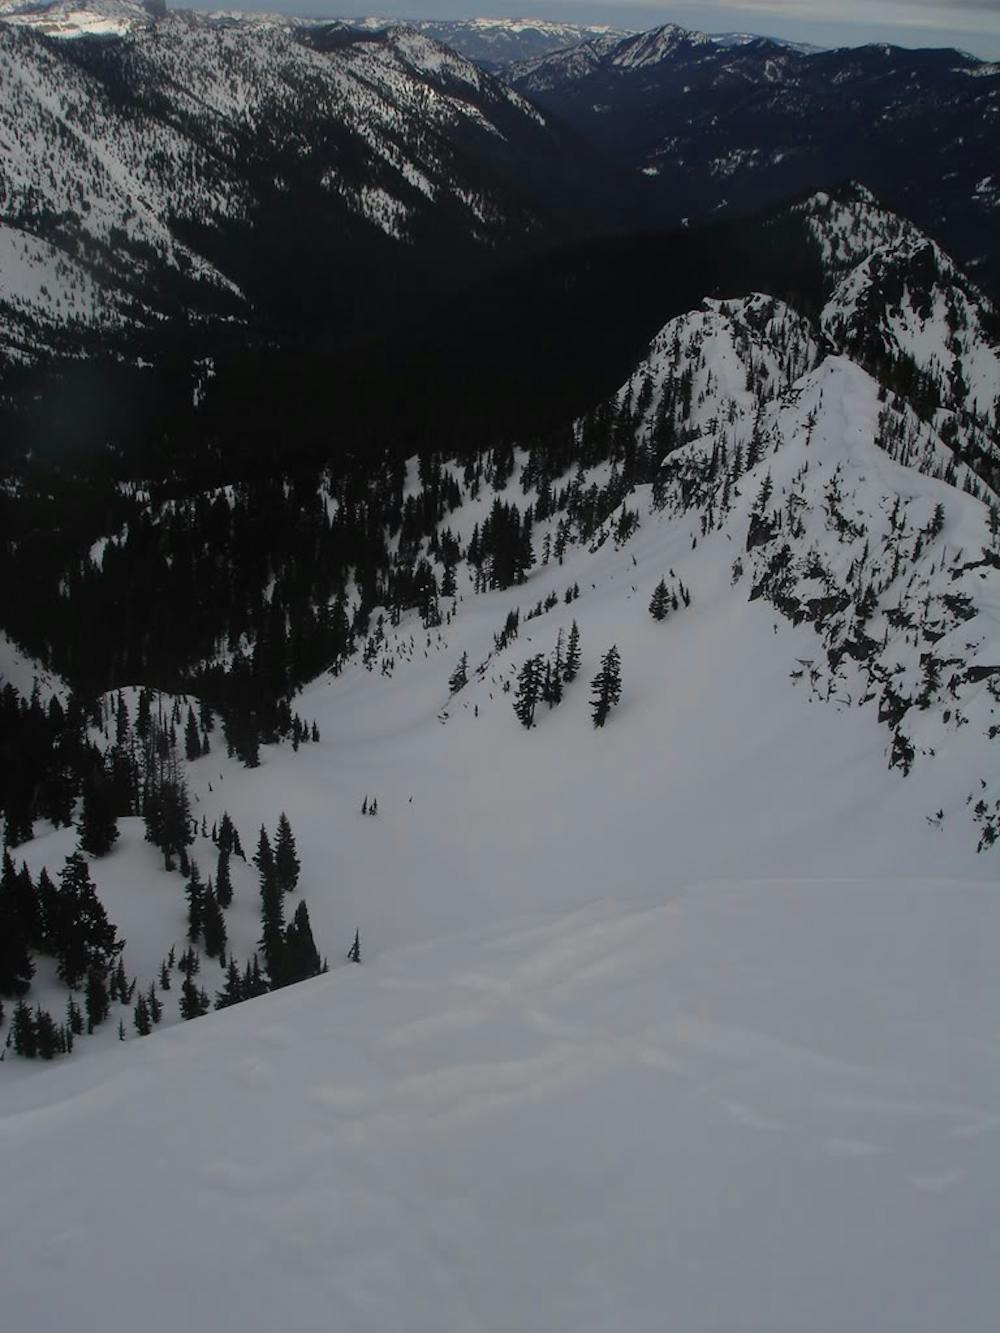 Looking down the bowl